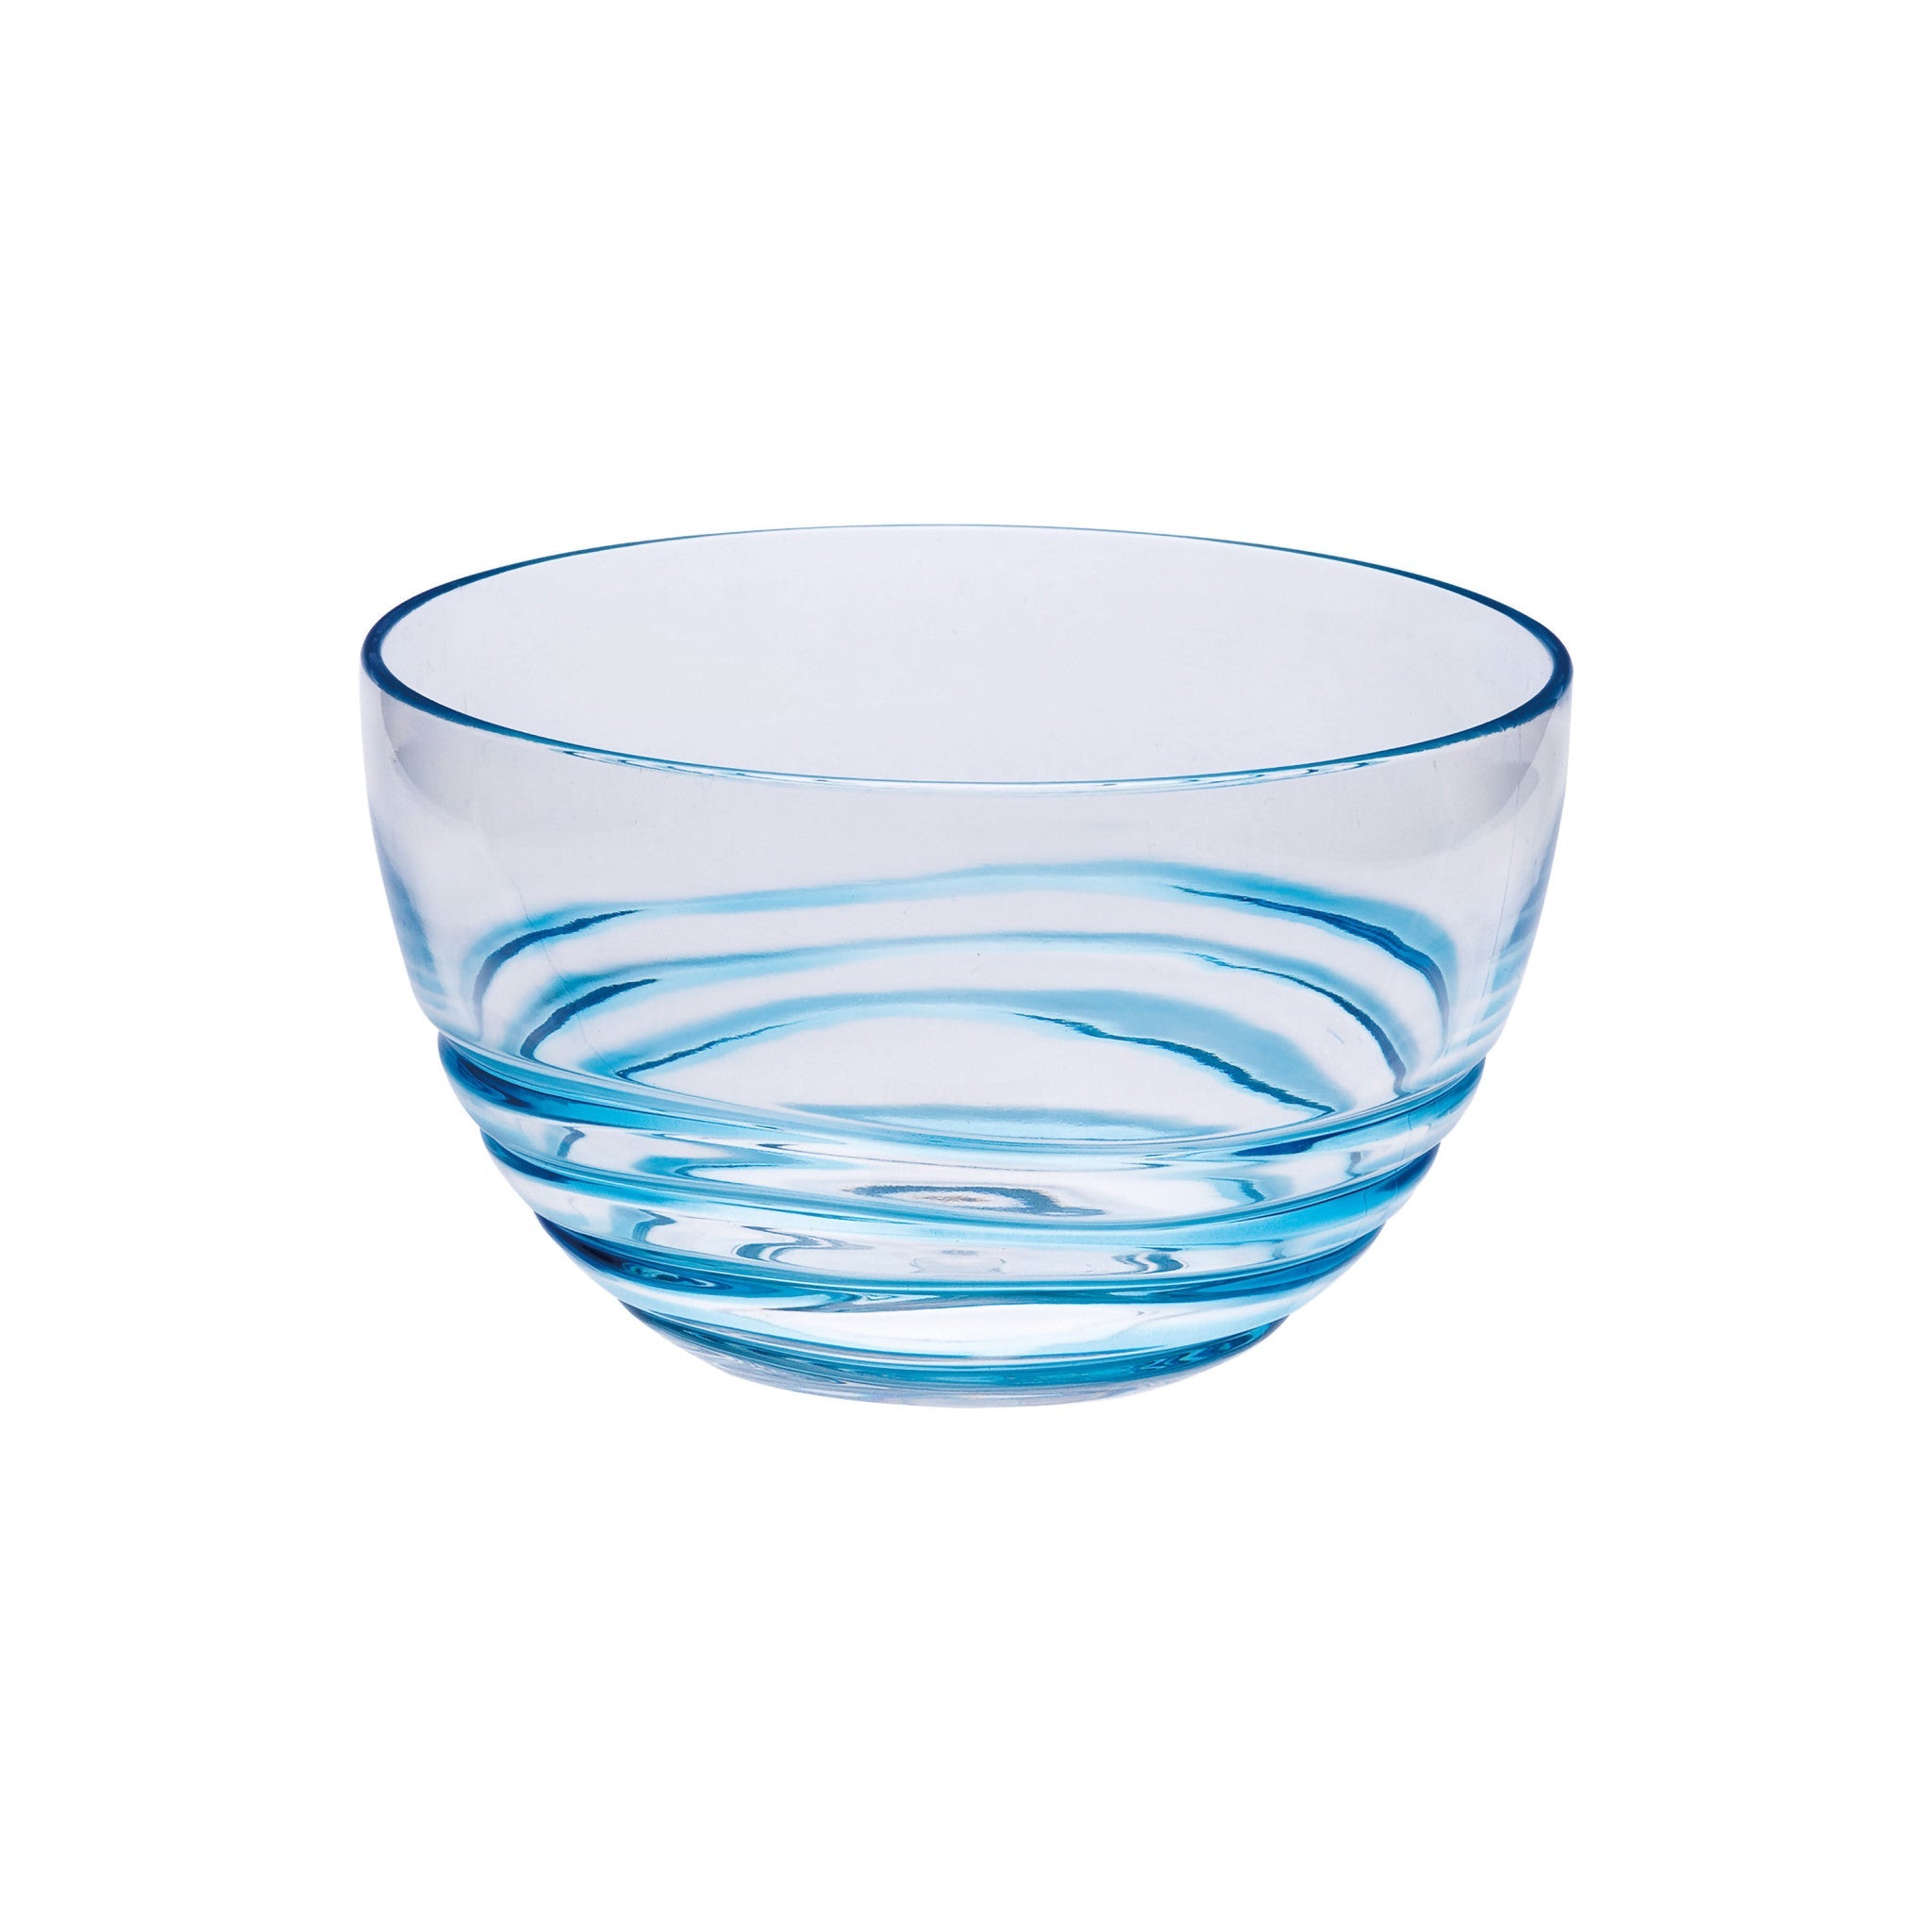 Clear-and-Blue-Four-Piece-Swirl-Acrylic-Service-For-Four-Bowl-Set-Dinnerware-Sets